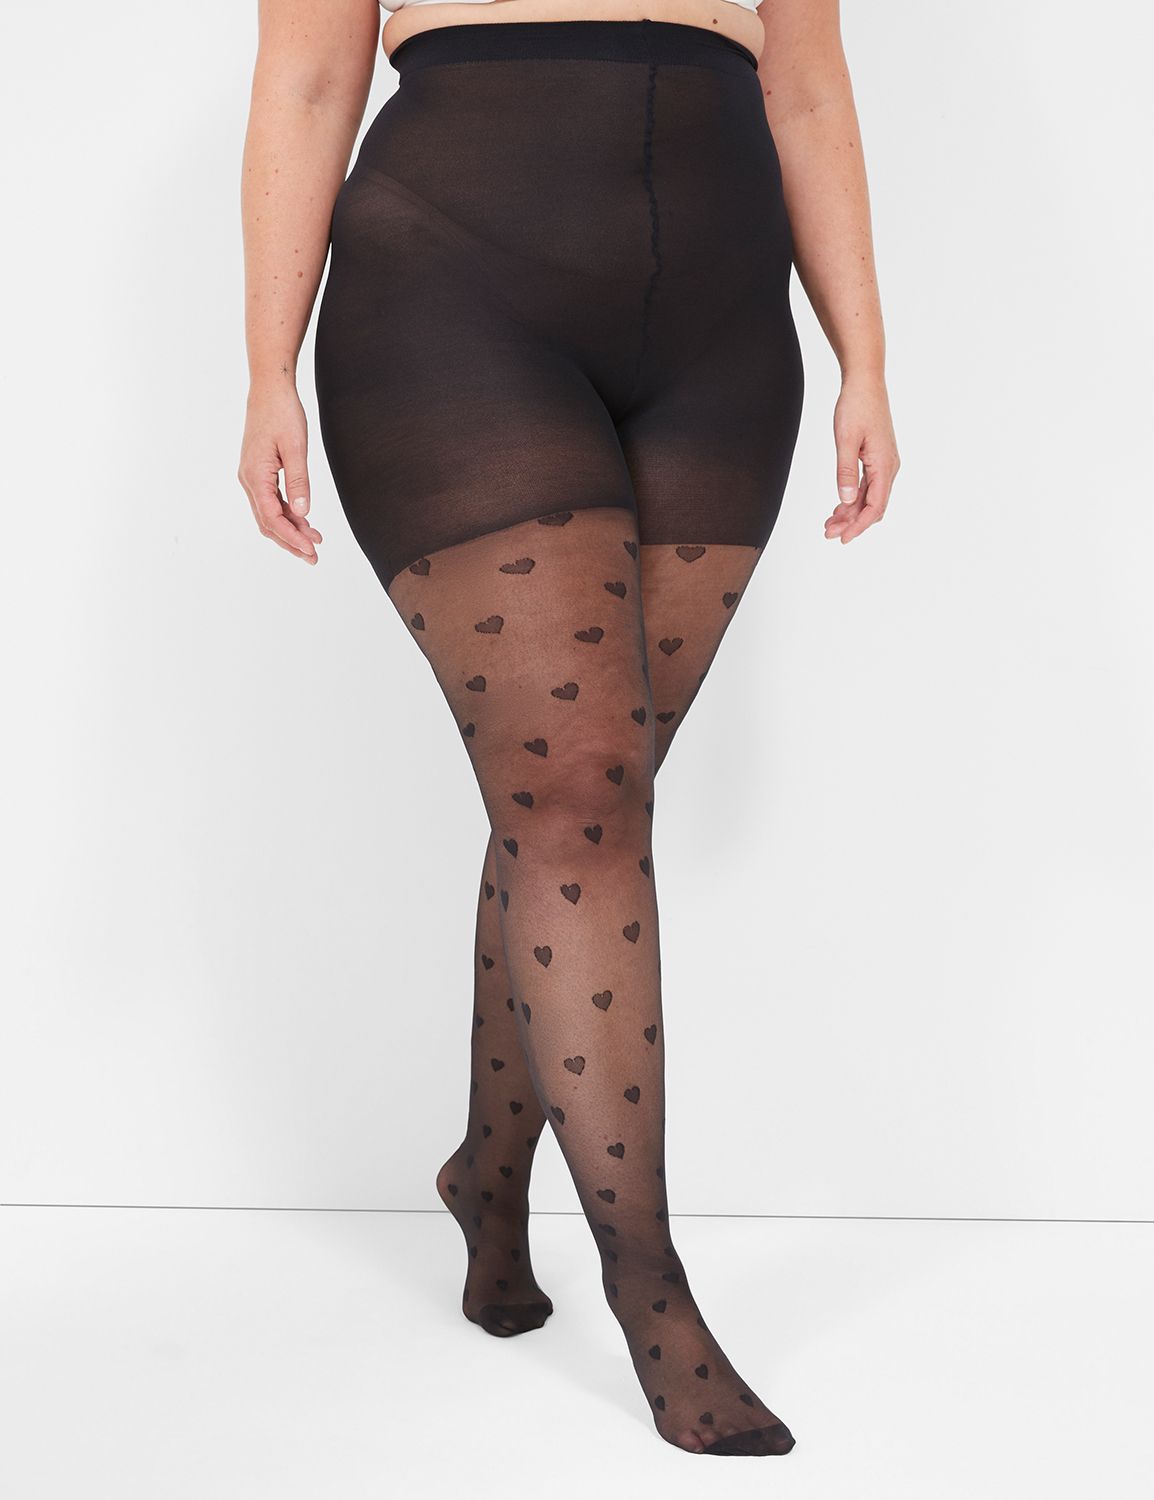 Plus Size Tights, Opaque, Print